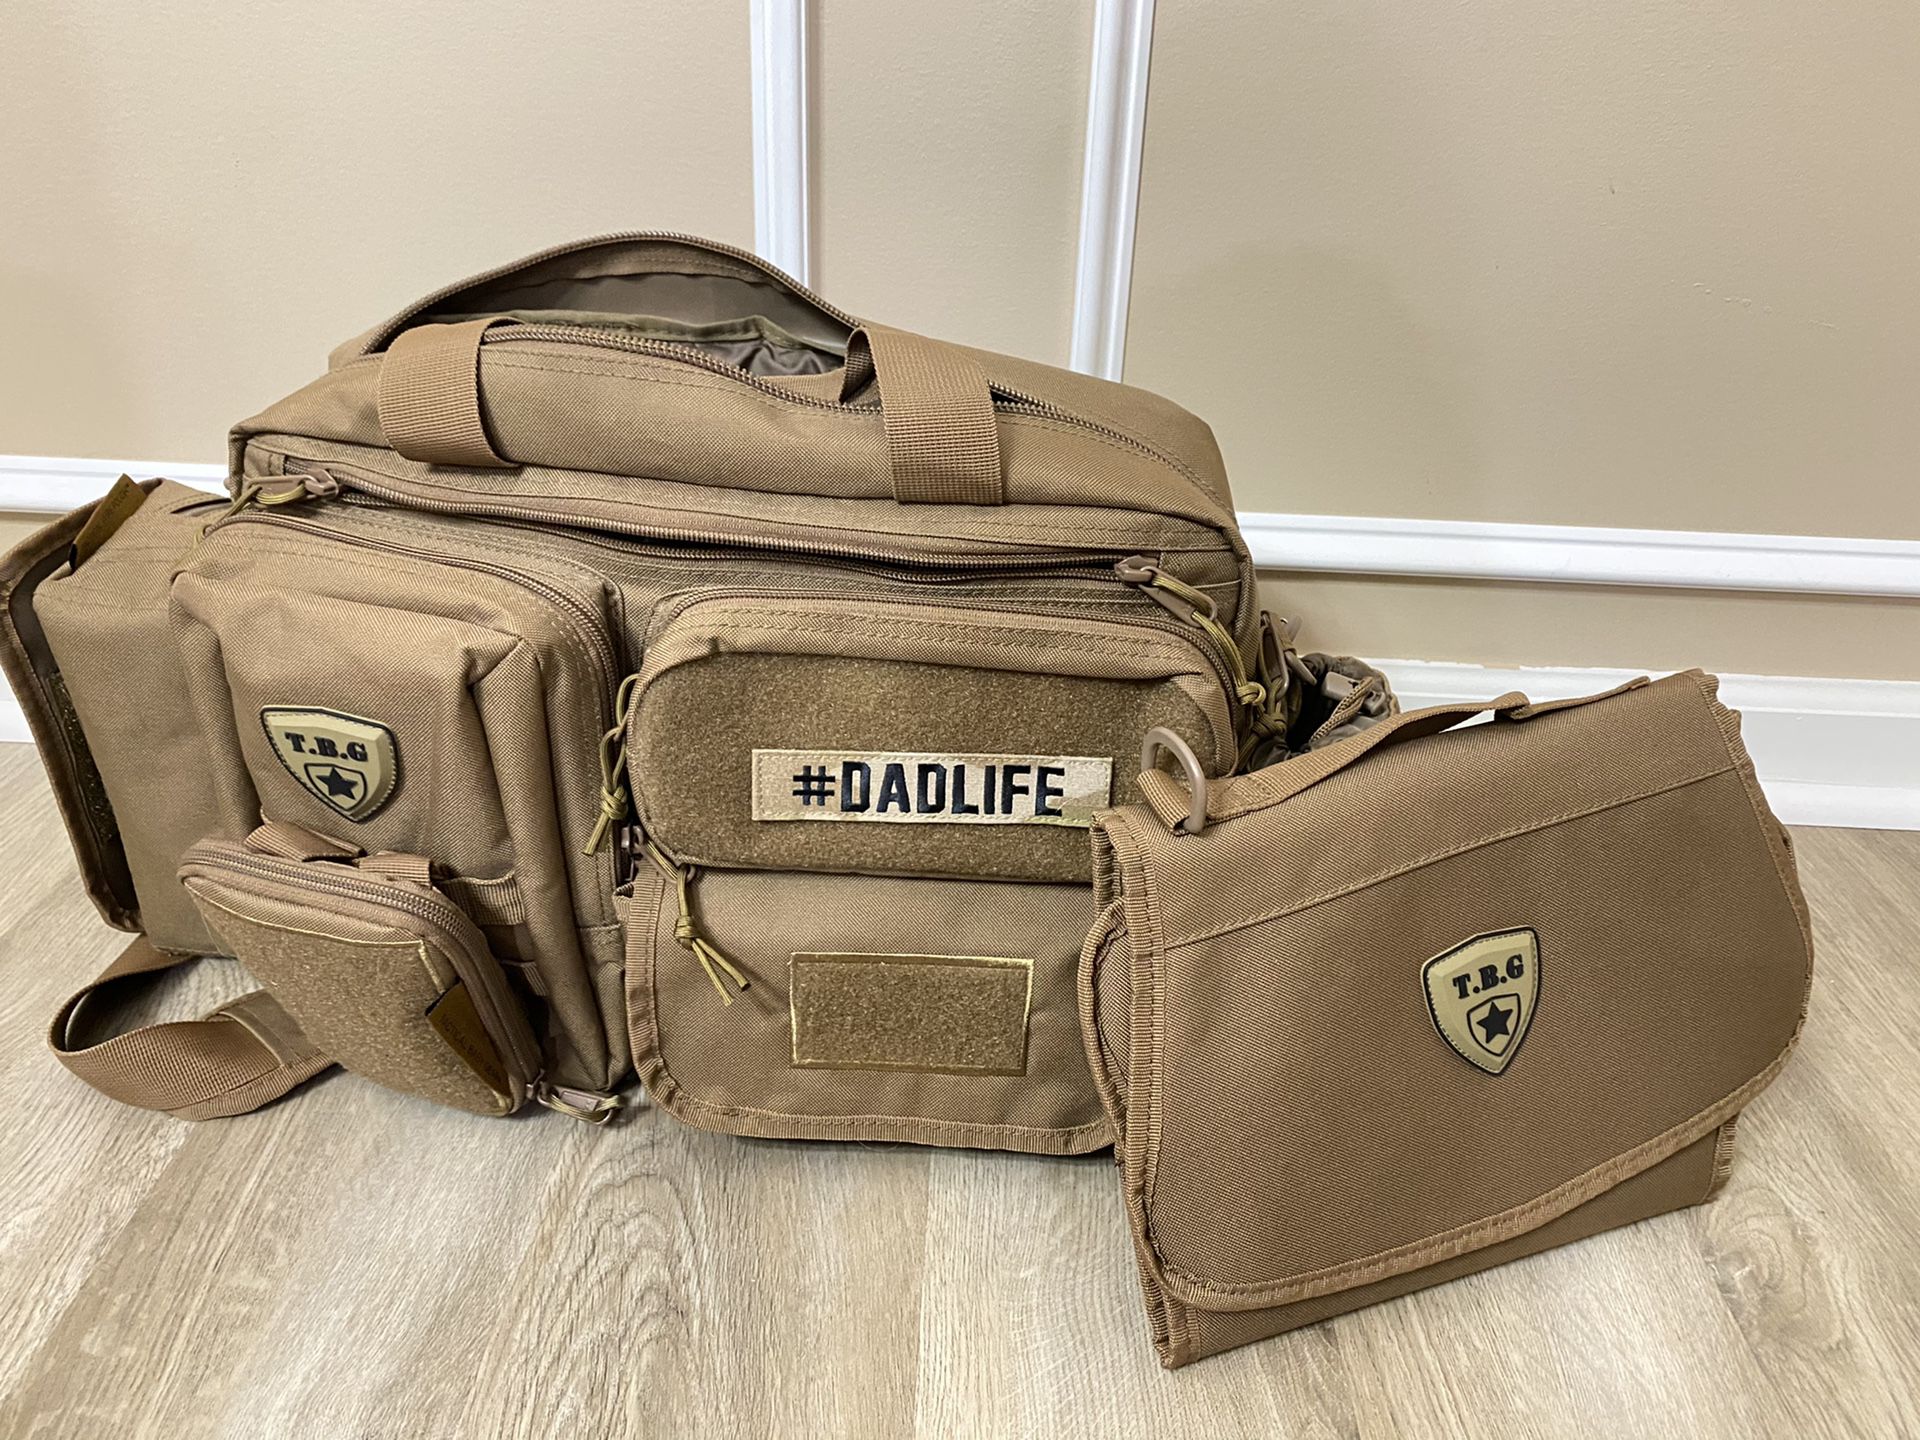 Tactical Baby gear diaper bag with added accessories